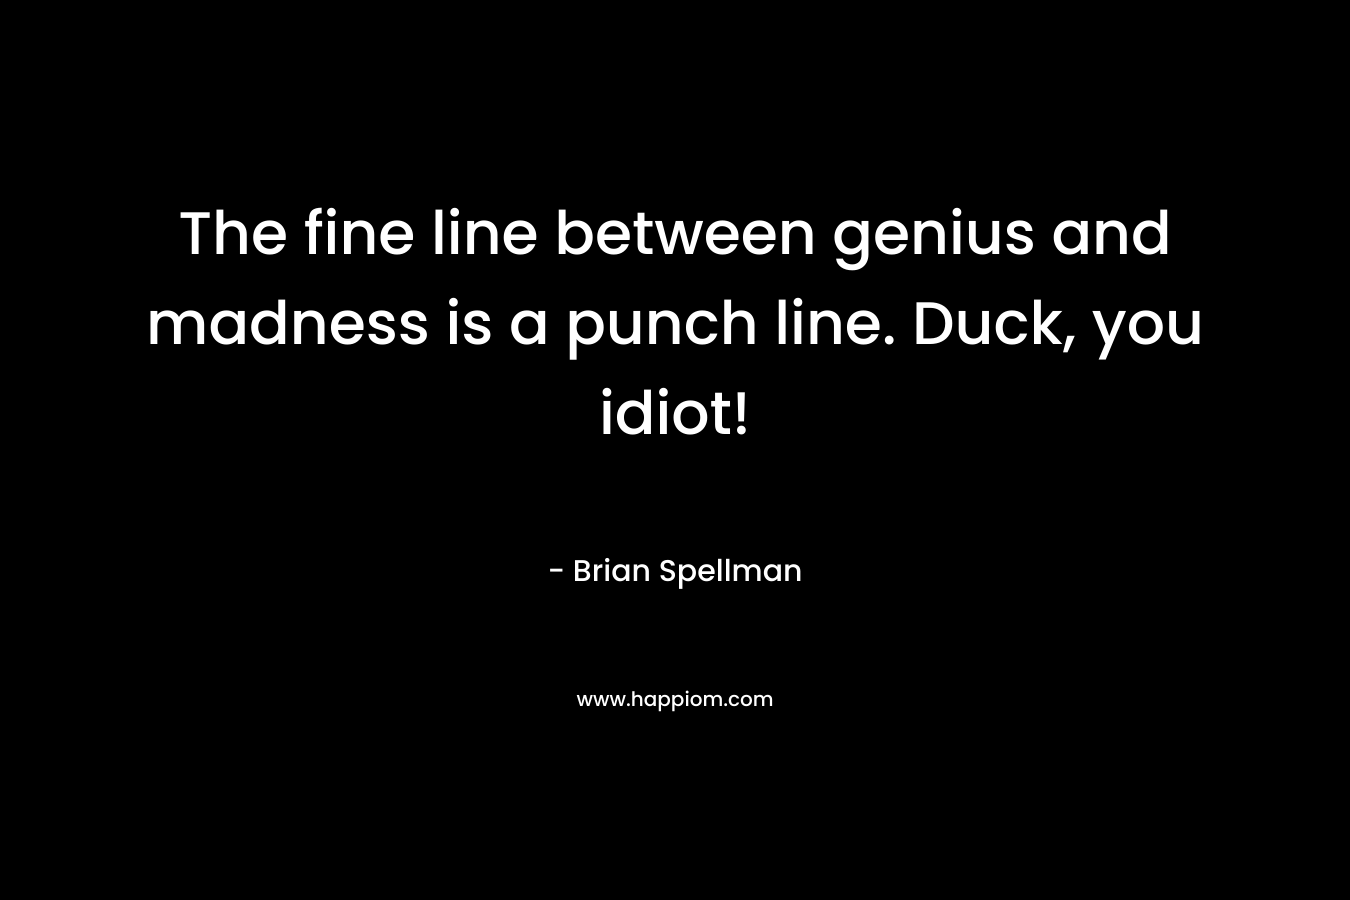 The fine line between genius and madness is a punch line. Duck, you idiot!